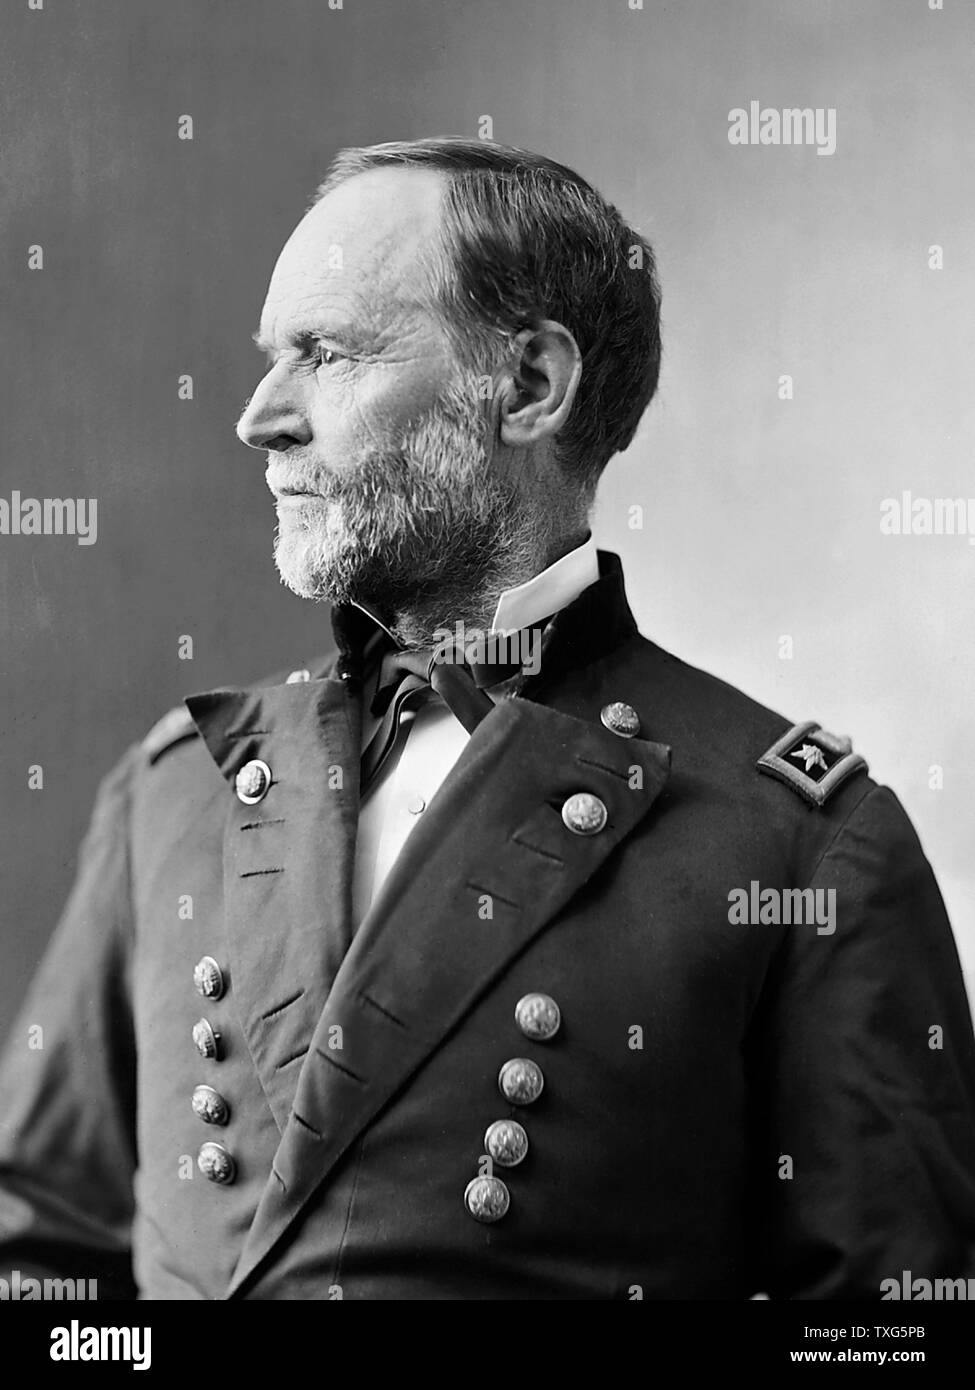 William Tecumseh Sherman, American soldier and businessman. During the American Civil War (1861-1865) he served as a General in the Union army. Outstanding strategist who conducted total war against the Confederate States. Stock Photo